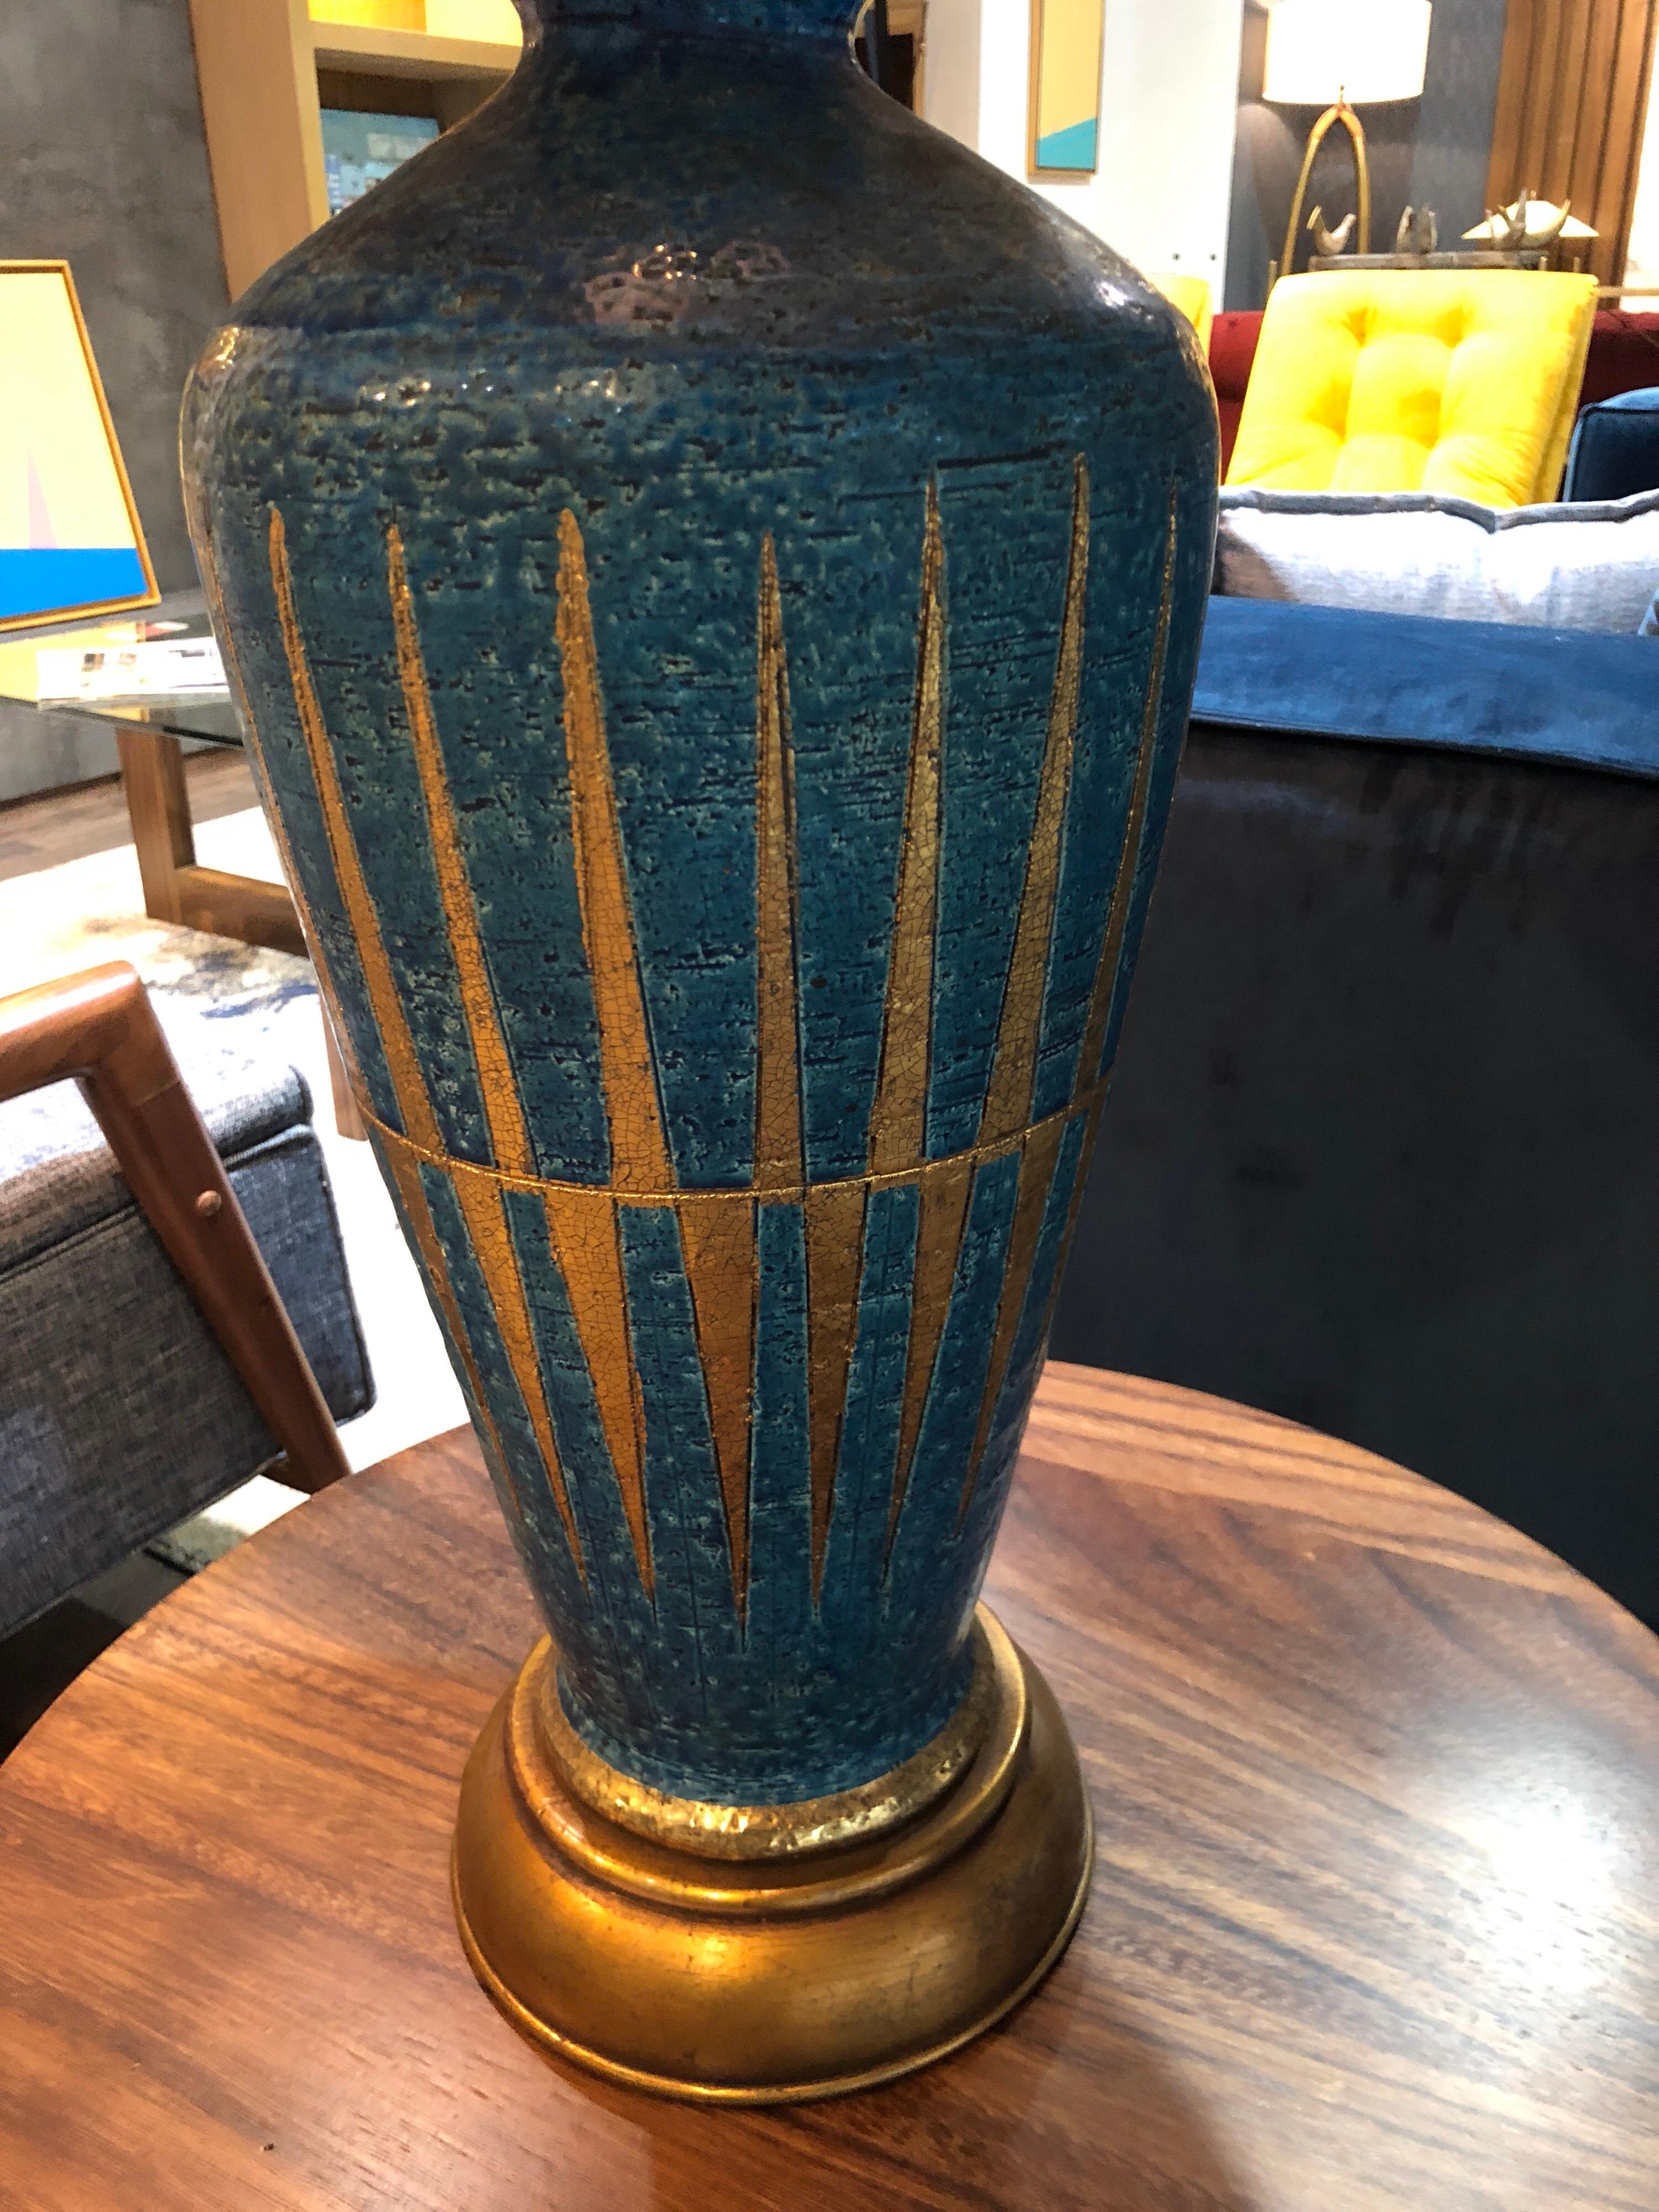 A spectacular Italian ceramic and satin brass table lamp designed by Guido Bitossi for Marbro. The lamp has beautiful cracked spear shapes in gold with a indigo blue background
The lamp is available without the shade
Dimensions without shade: 9.5